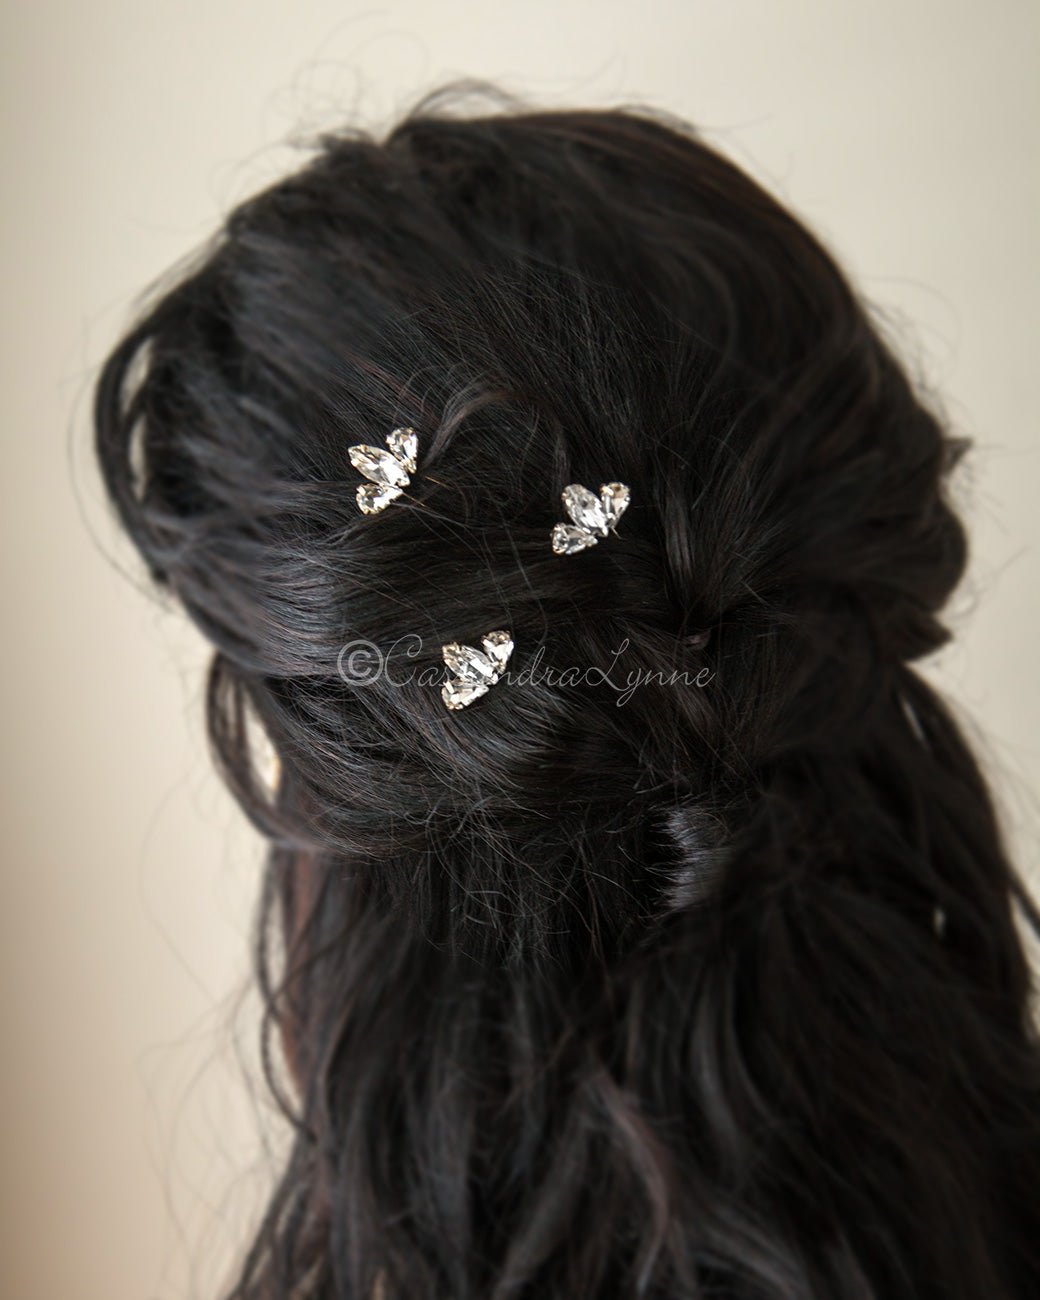 Gold Bridal Hair Pin Set Marquise and Pear Jewels - Cassandra Lynne